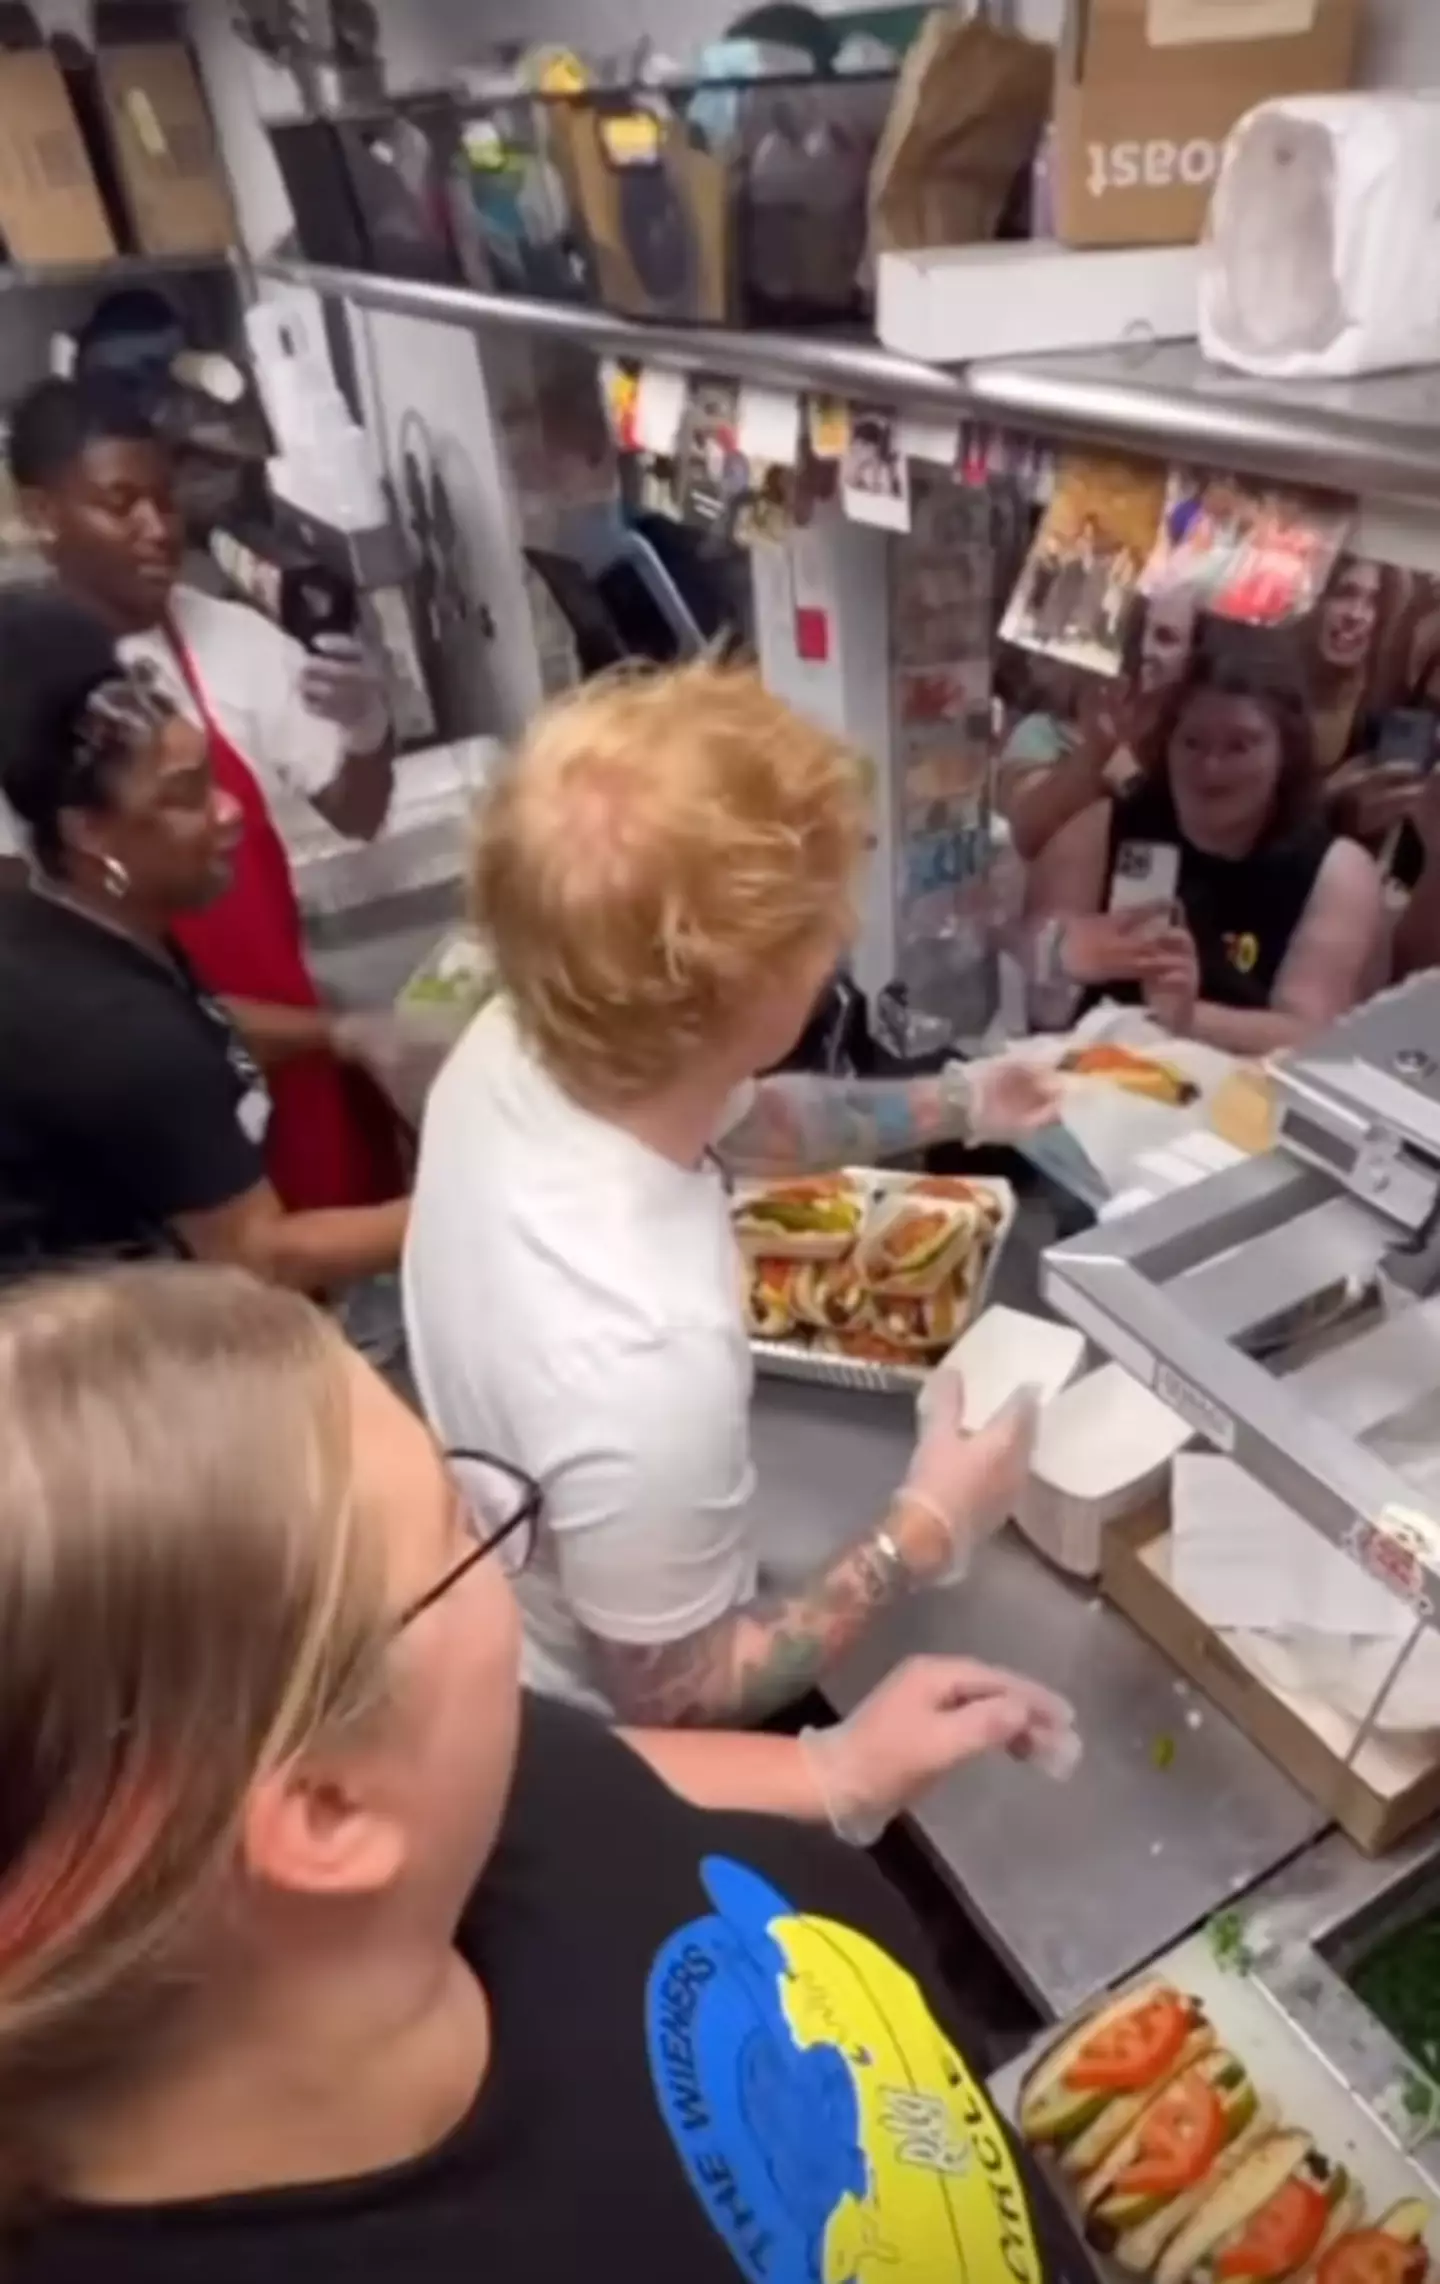 Ed Sheeran served hot dogs at The Wieners Circle.